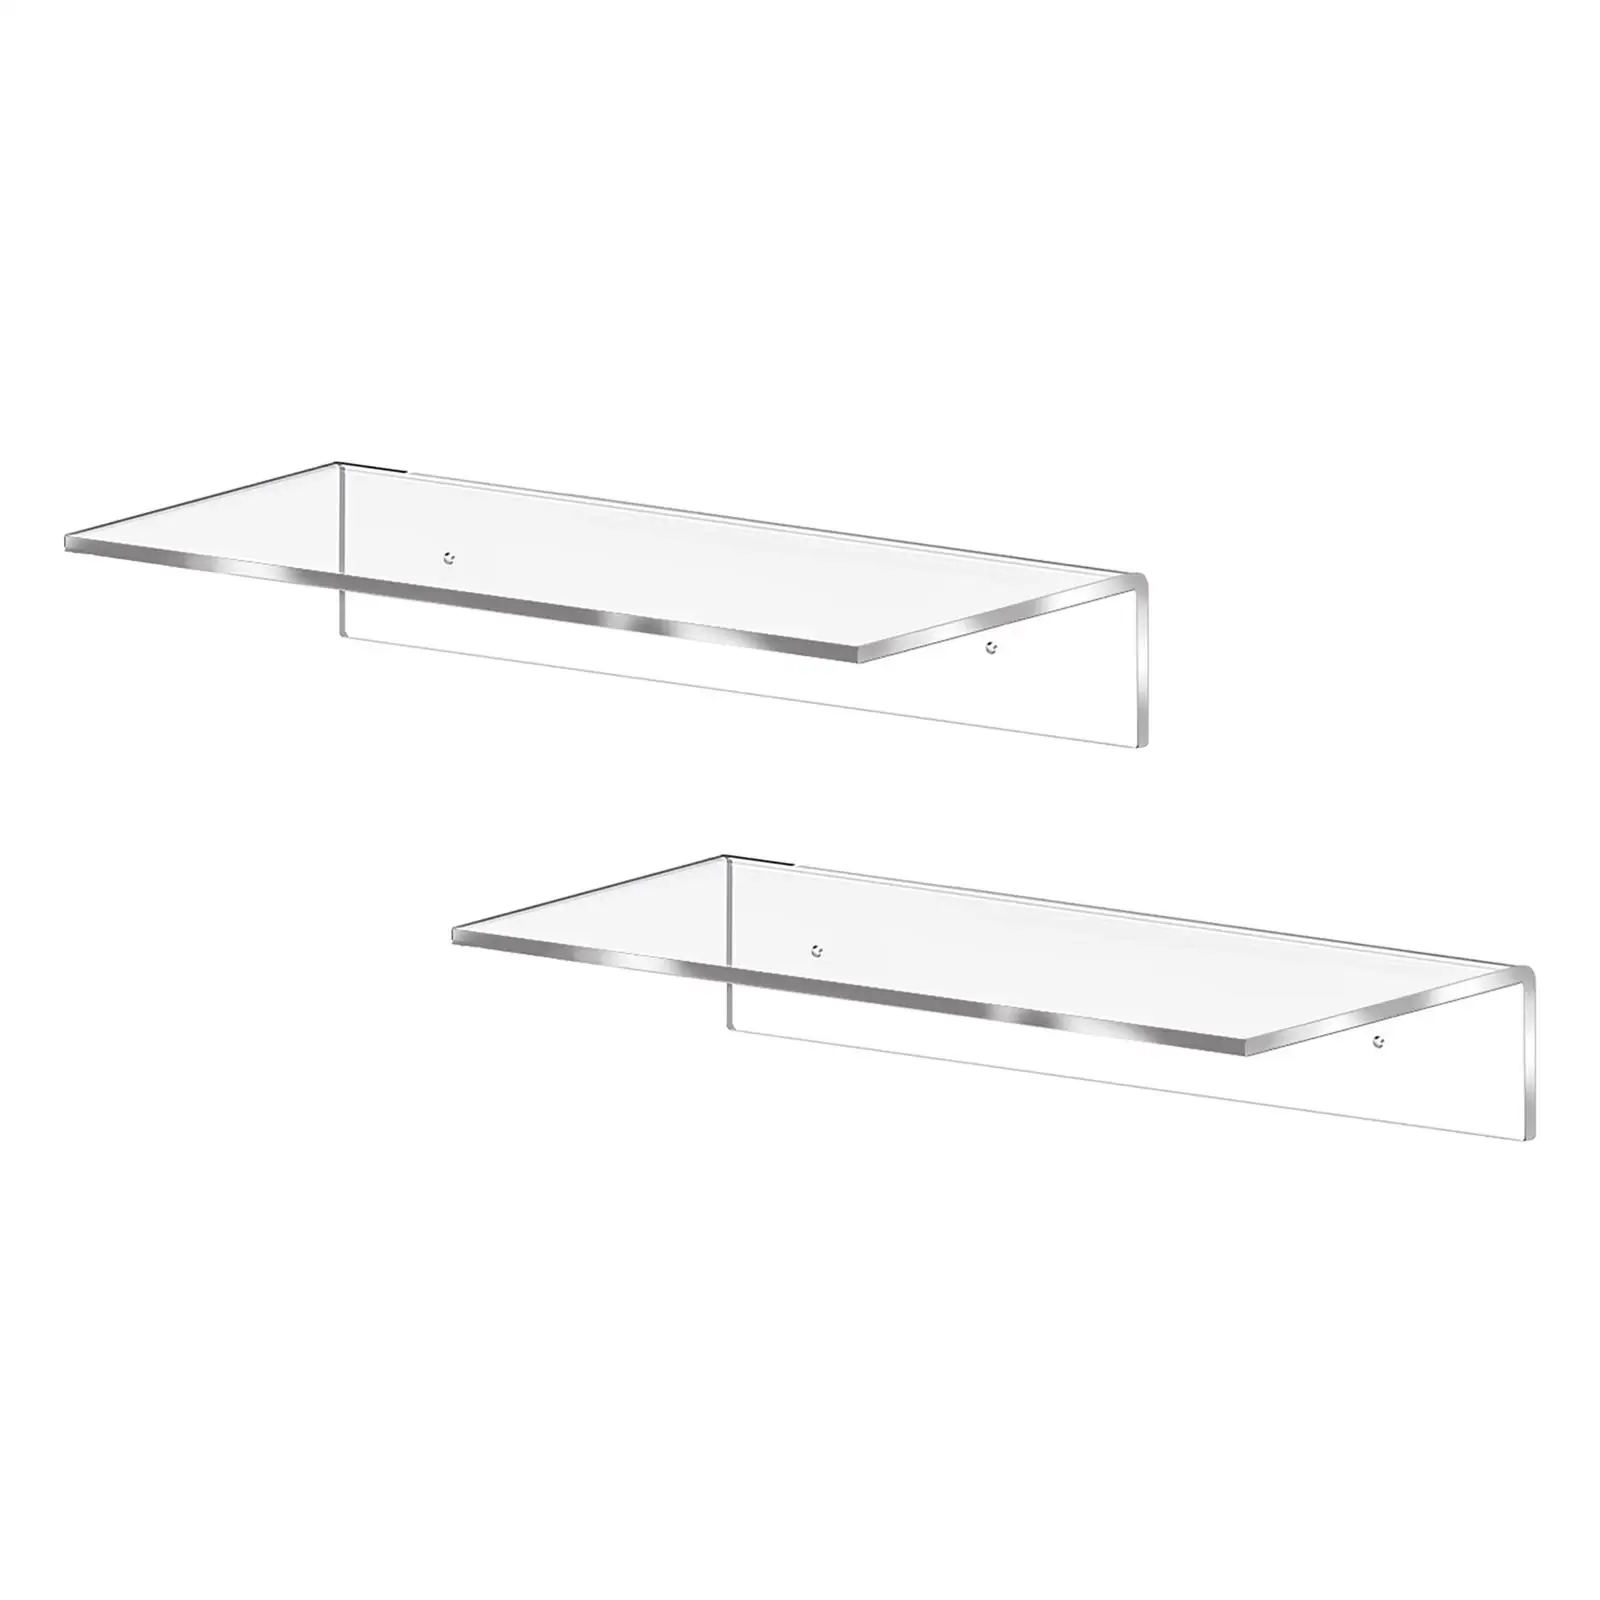 Acrylic Shelf Multipurpose Container Organization Accessories Floating Shelves for Kitchen